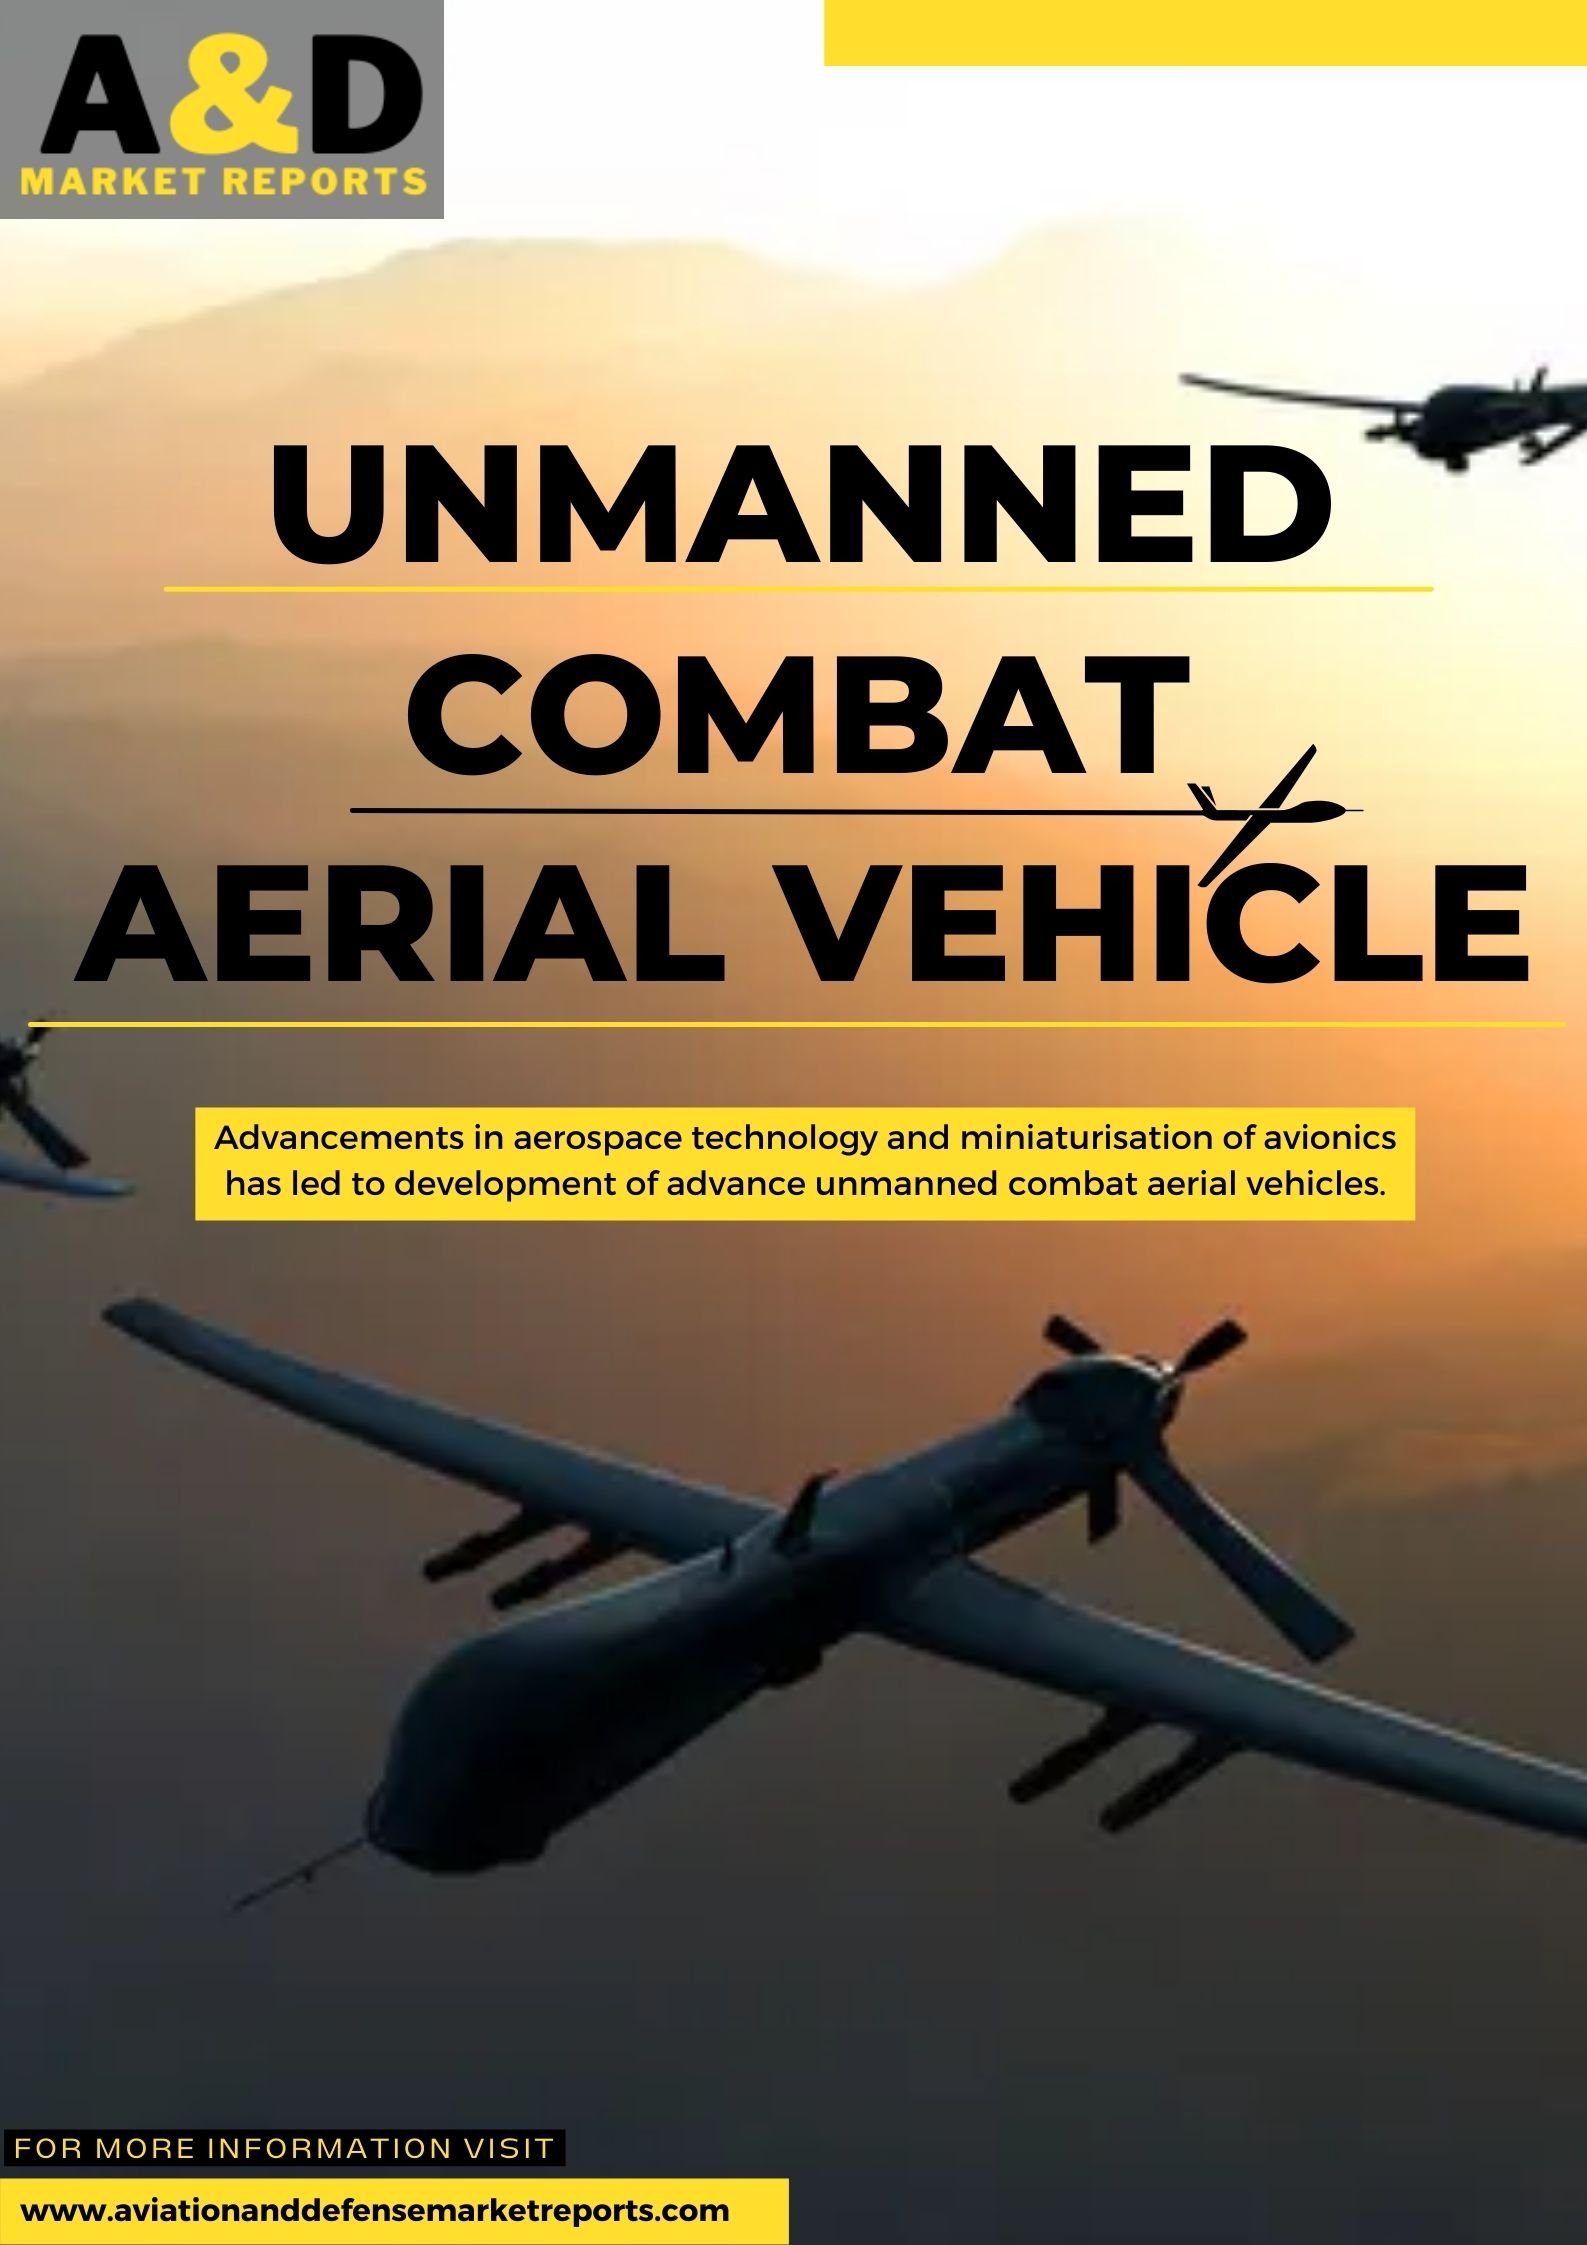 Unmanned Combat Aerial Vehicle UCAV’s will be the future in Air Combat